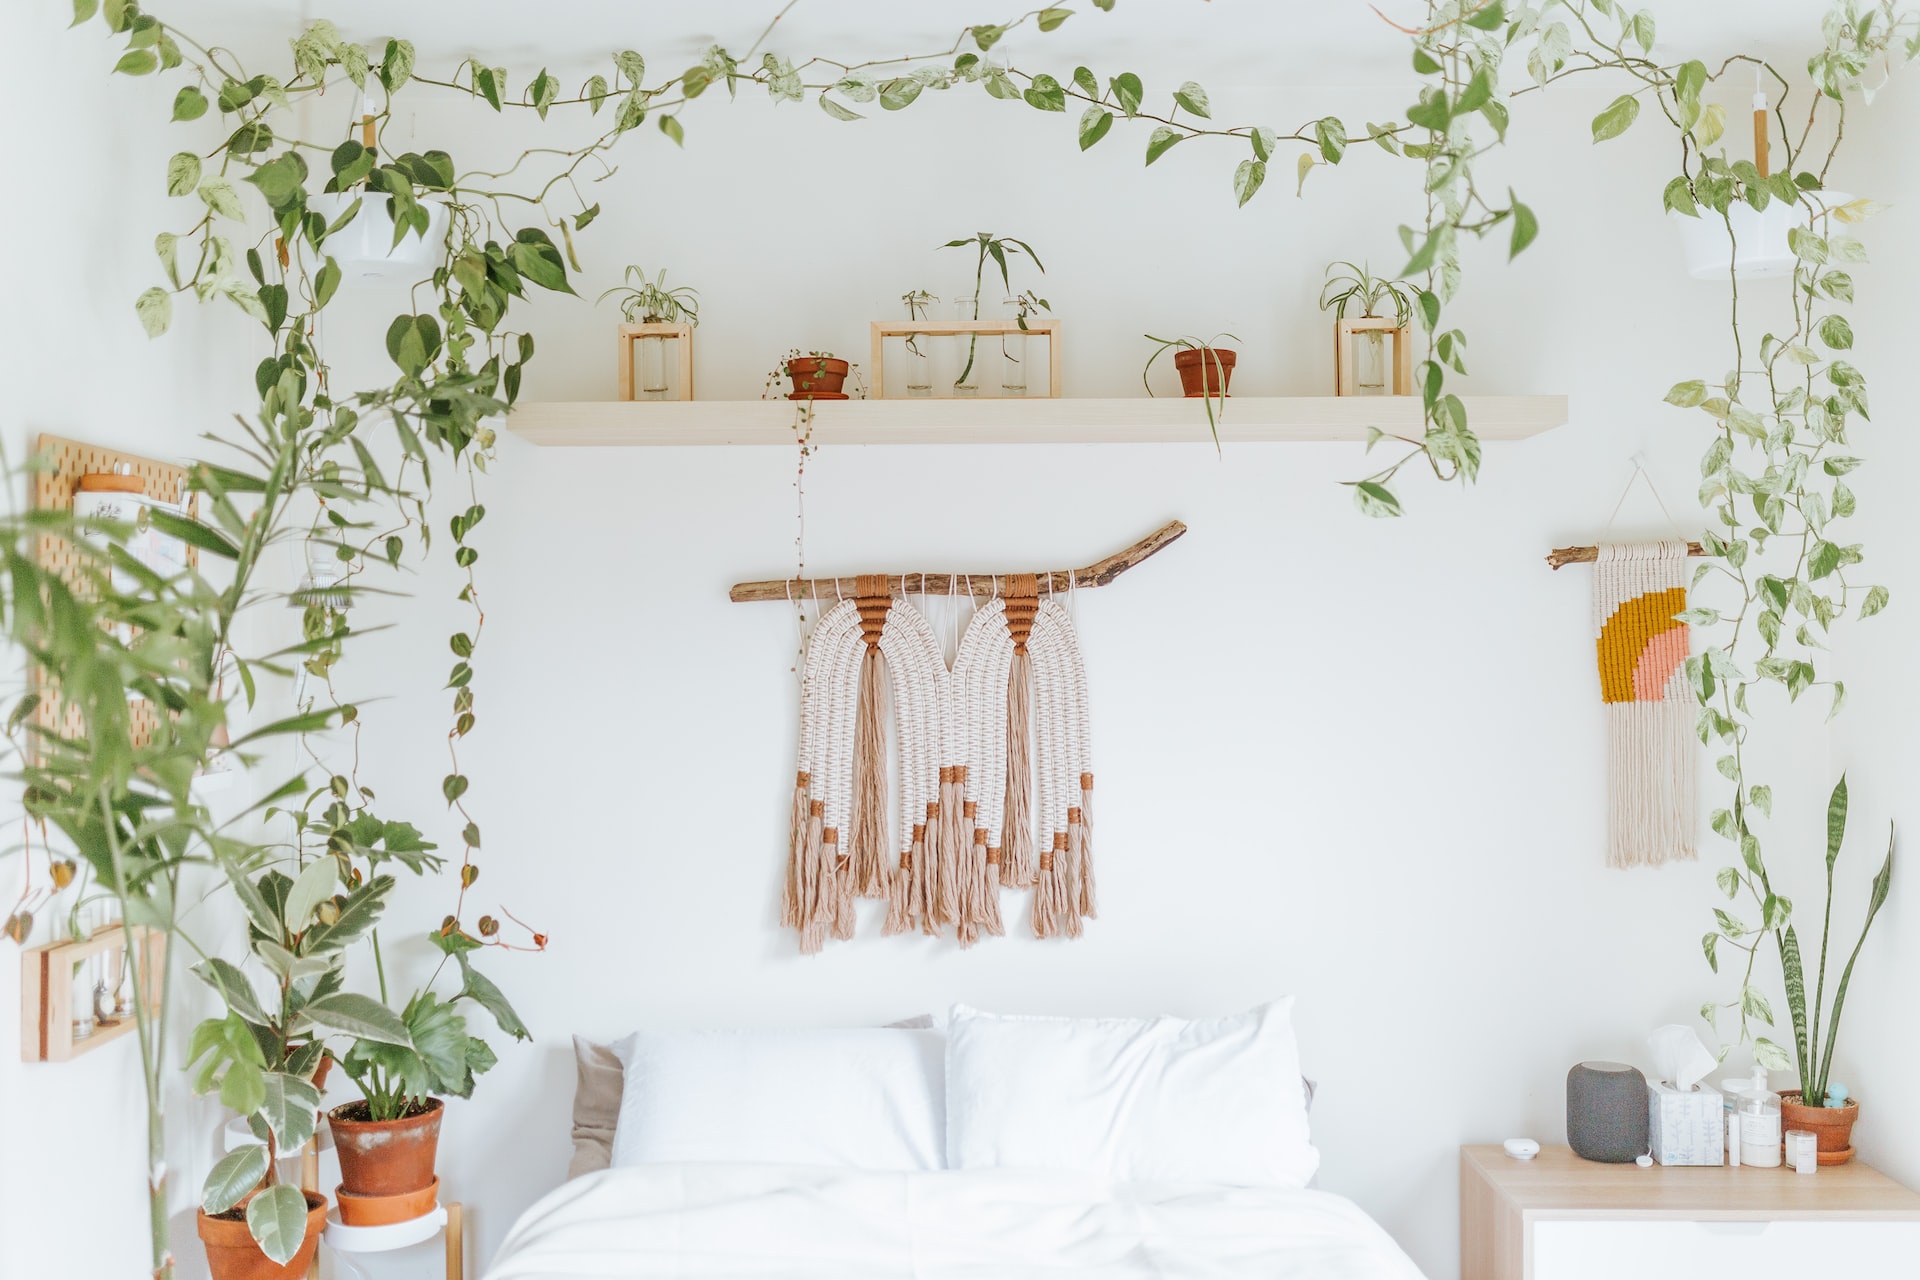 Bedroom with white walls, houseplants, fake vines, and macramé